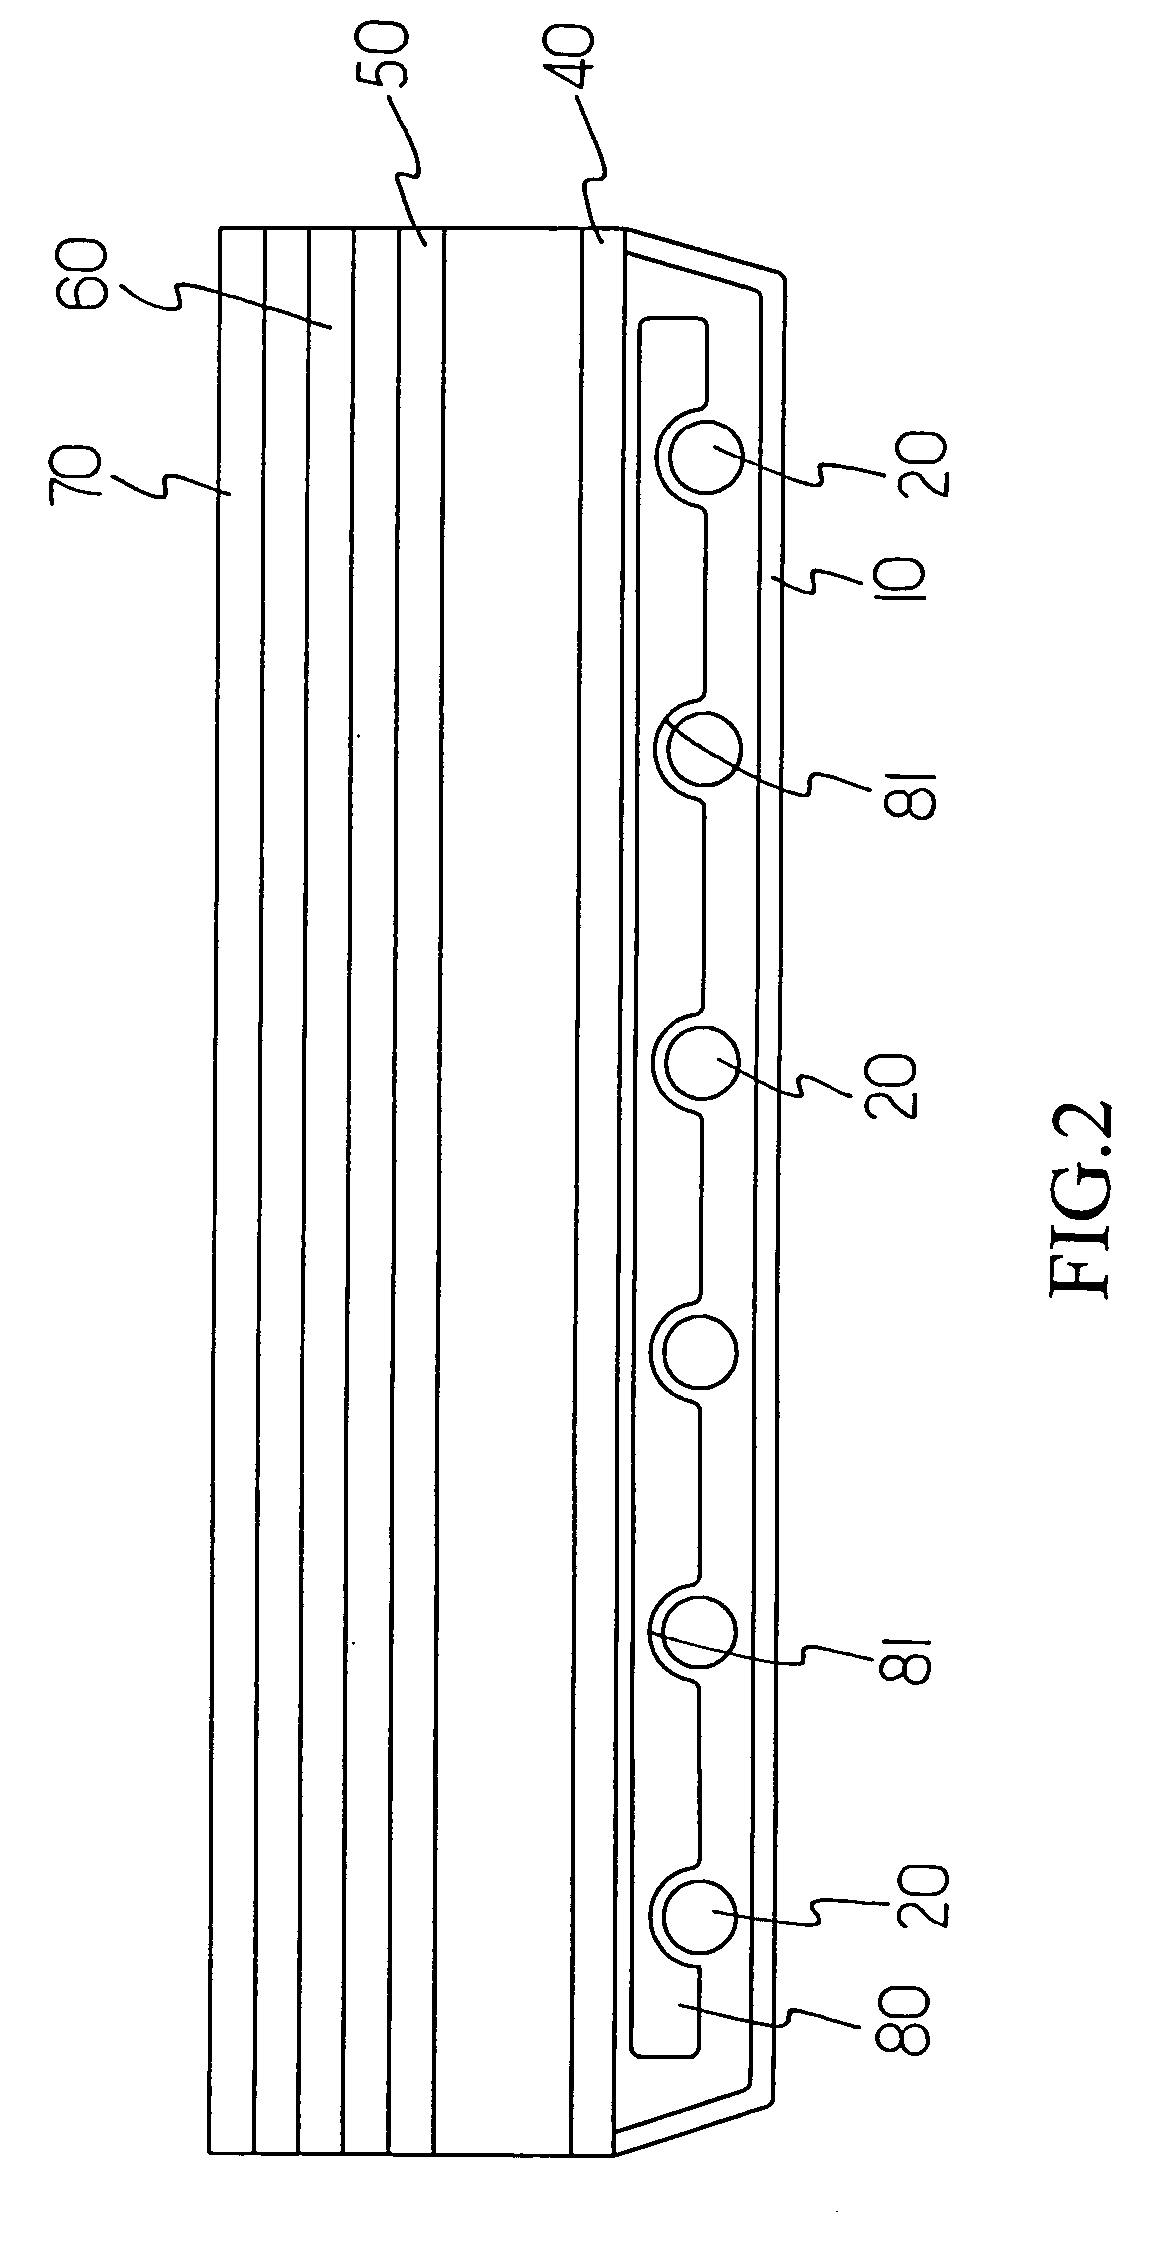 LCD optical waveguide device